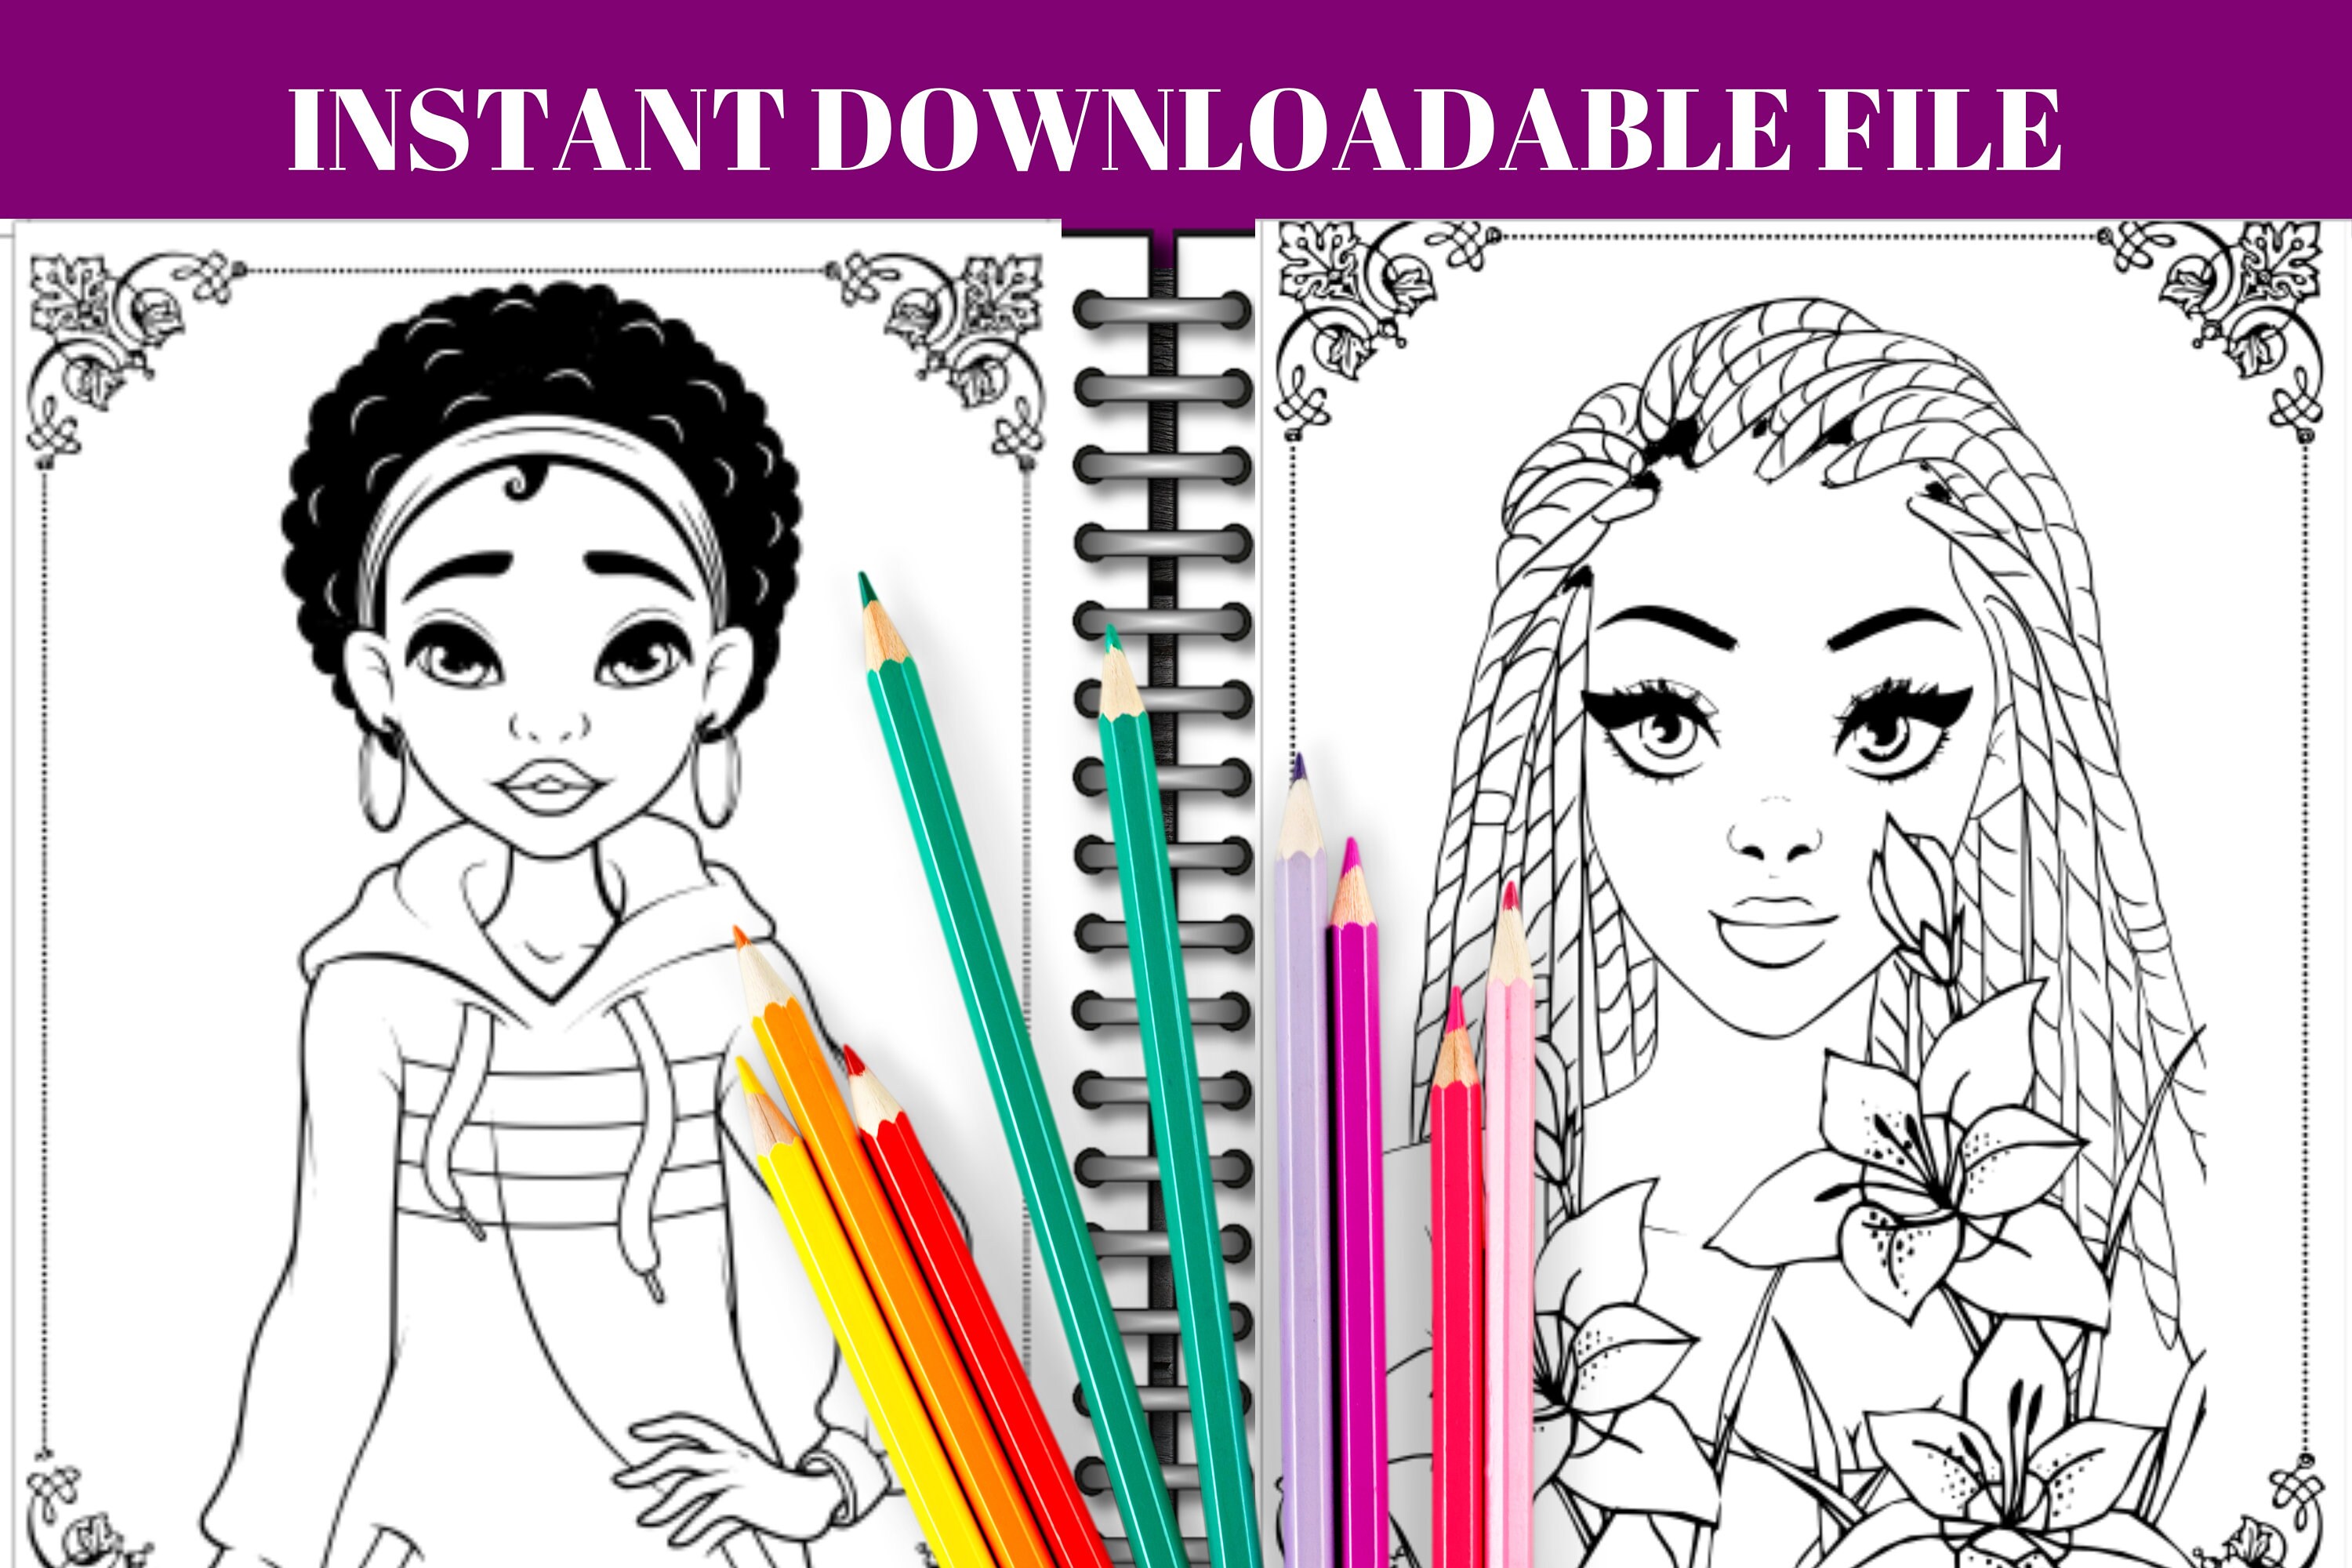 Black Girl Coloring Book, Black Girl Coloring Book For Adults, Black Girl  Coloring Book For Teens, Black Girl Magic, Black Girl Books, Black Girl   Coloring Book, Relaxation Gifts For Women.: Z